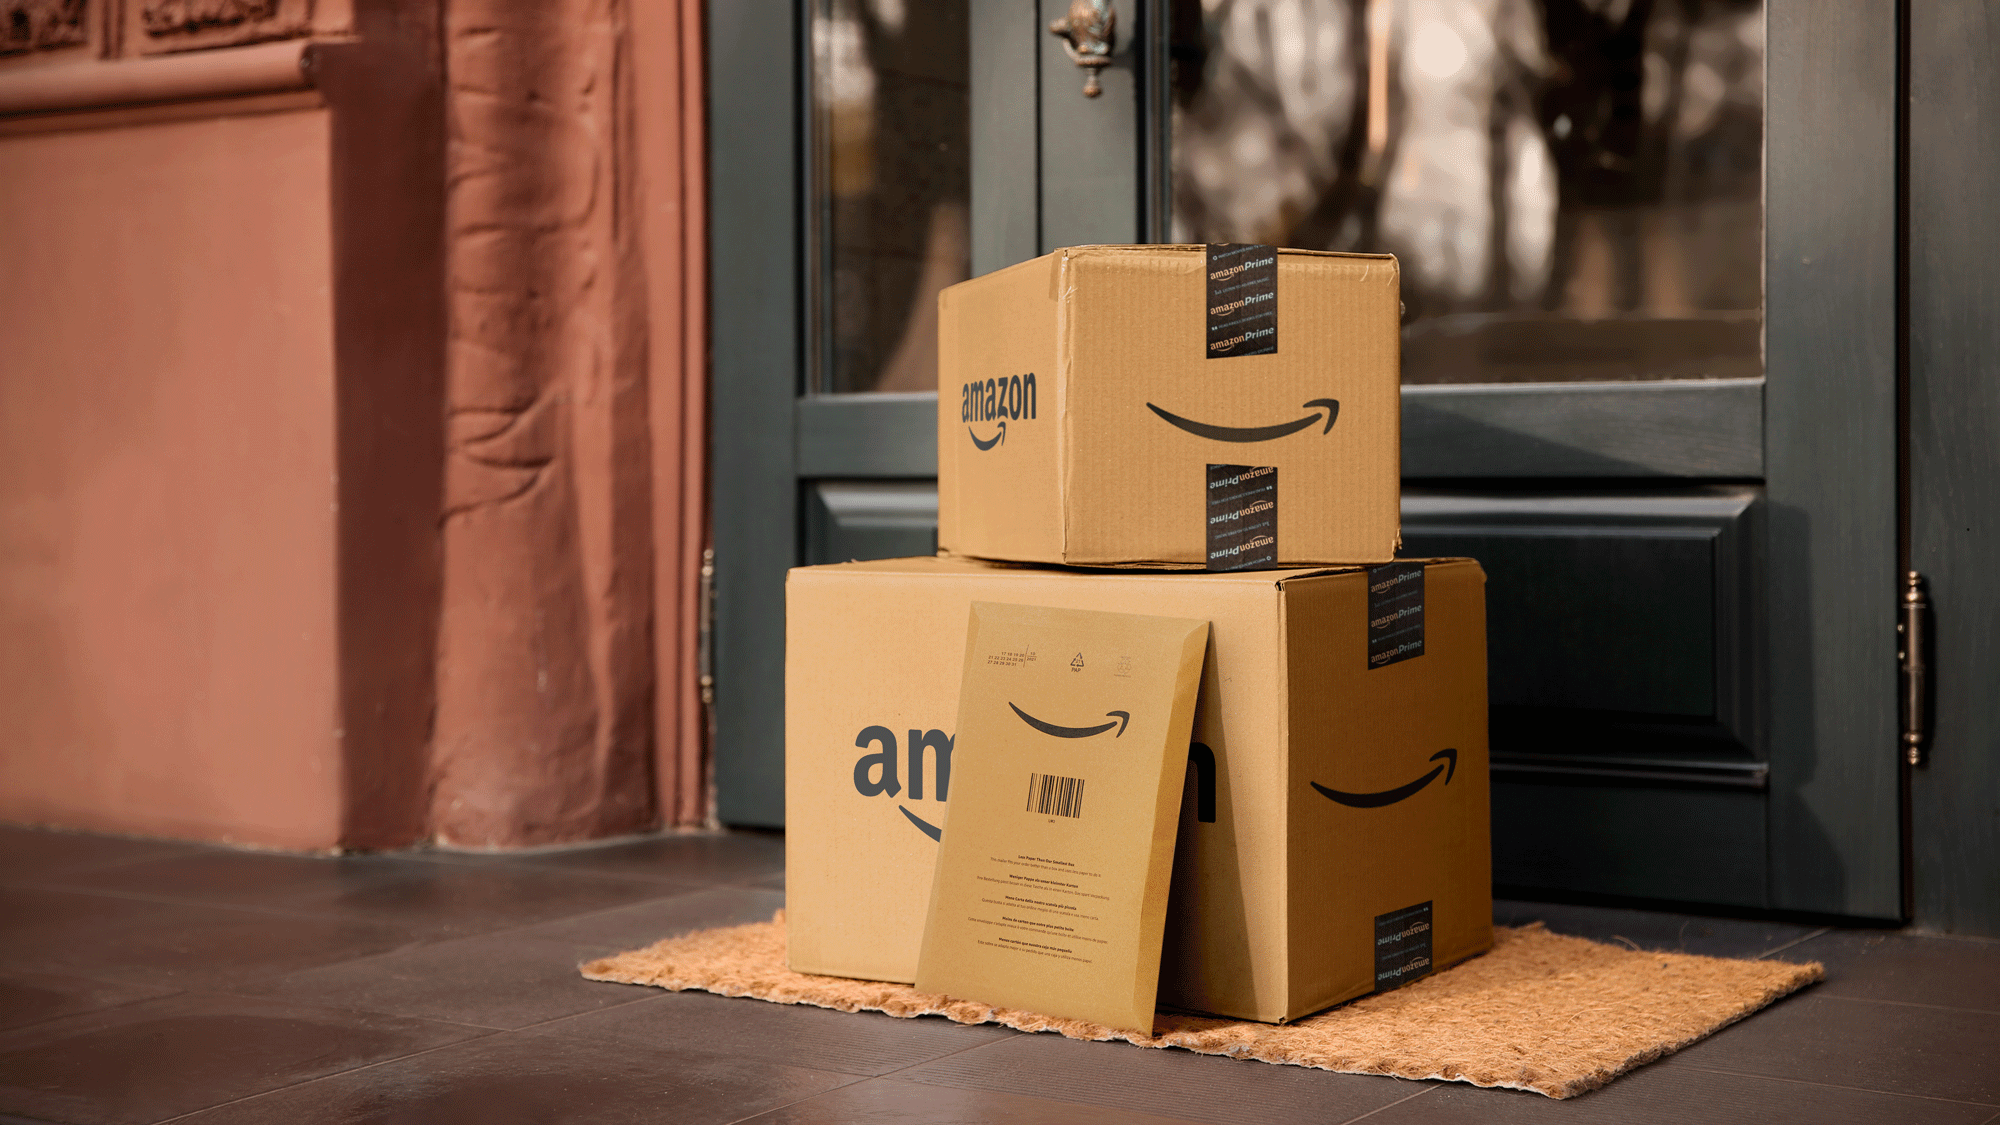 An image of two Amazon delivery boxes and an envelope on the floor next to a front door.  